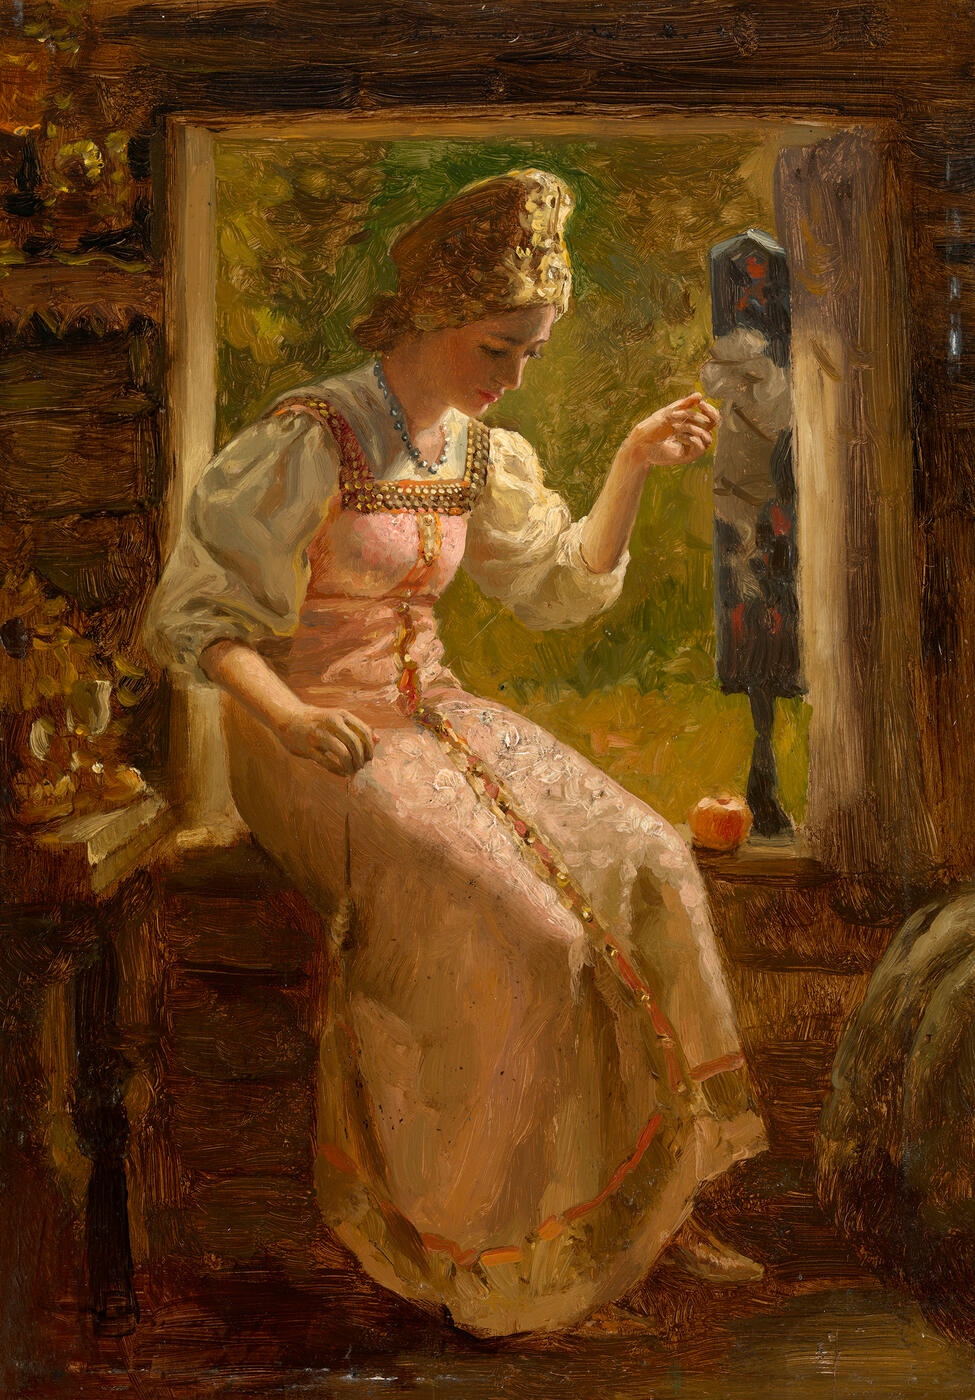 Young Woman Spinning Yarn by the Window